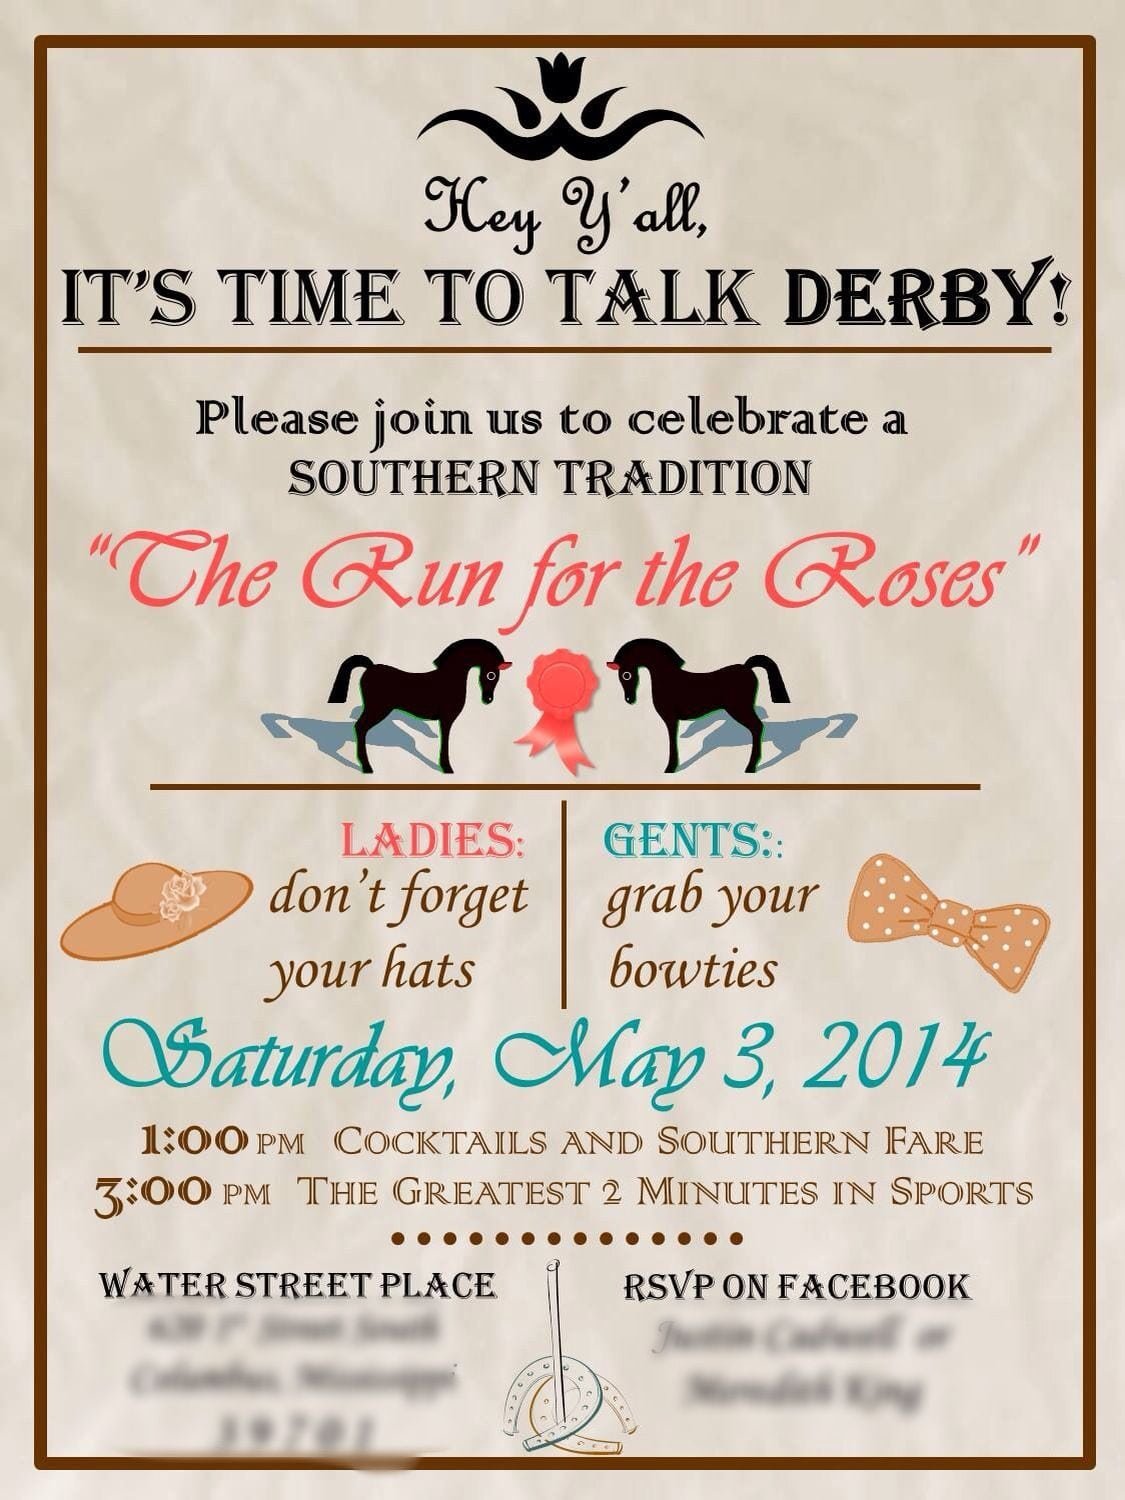 My Kentucky Derby Party Invitation!